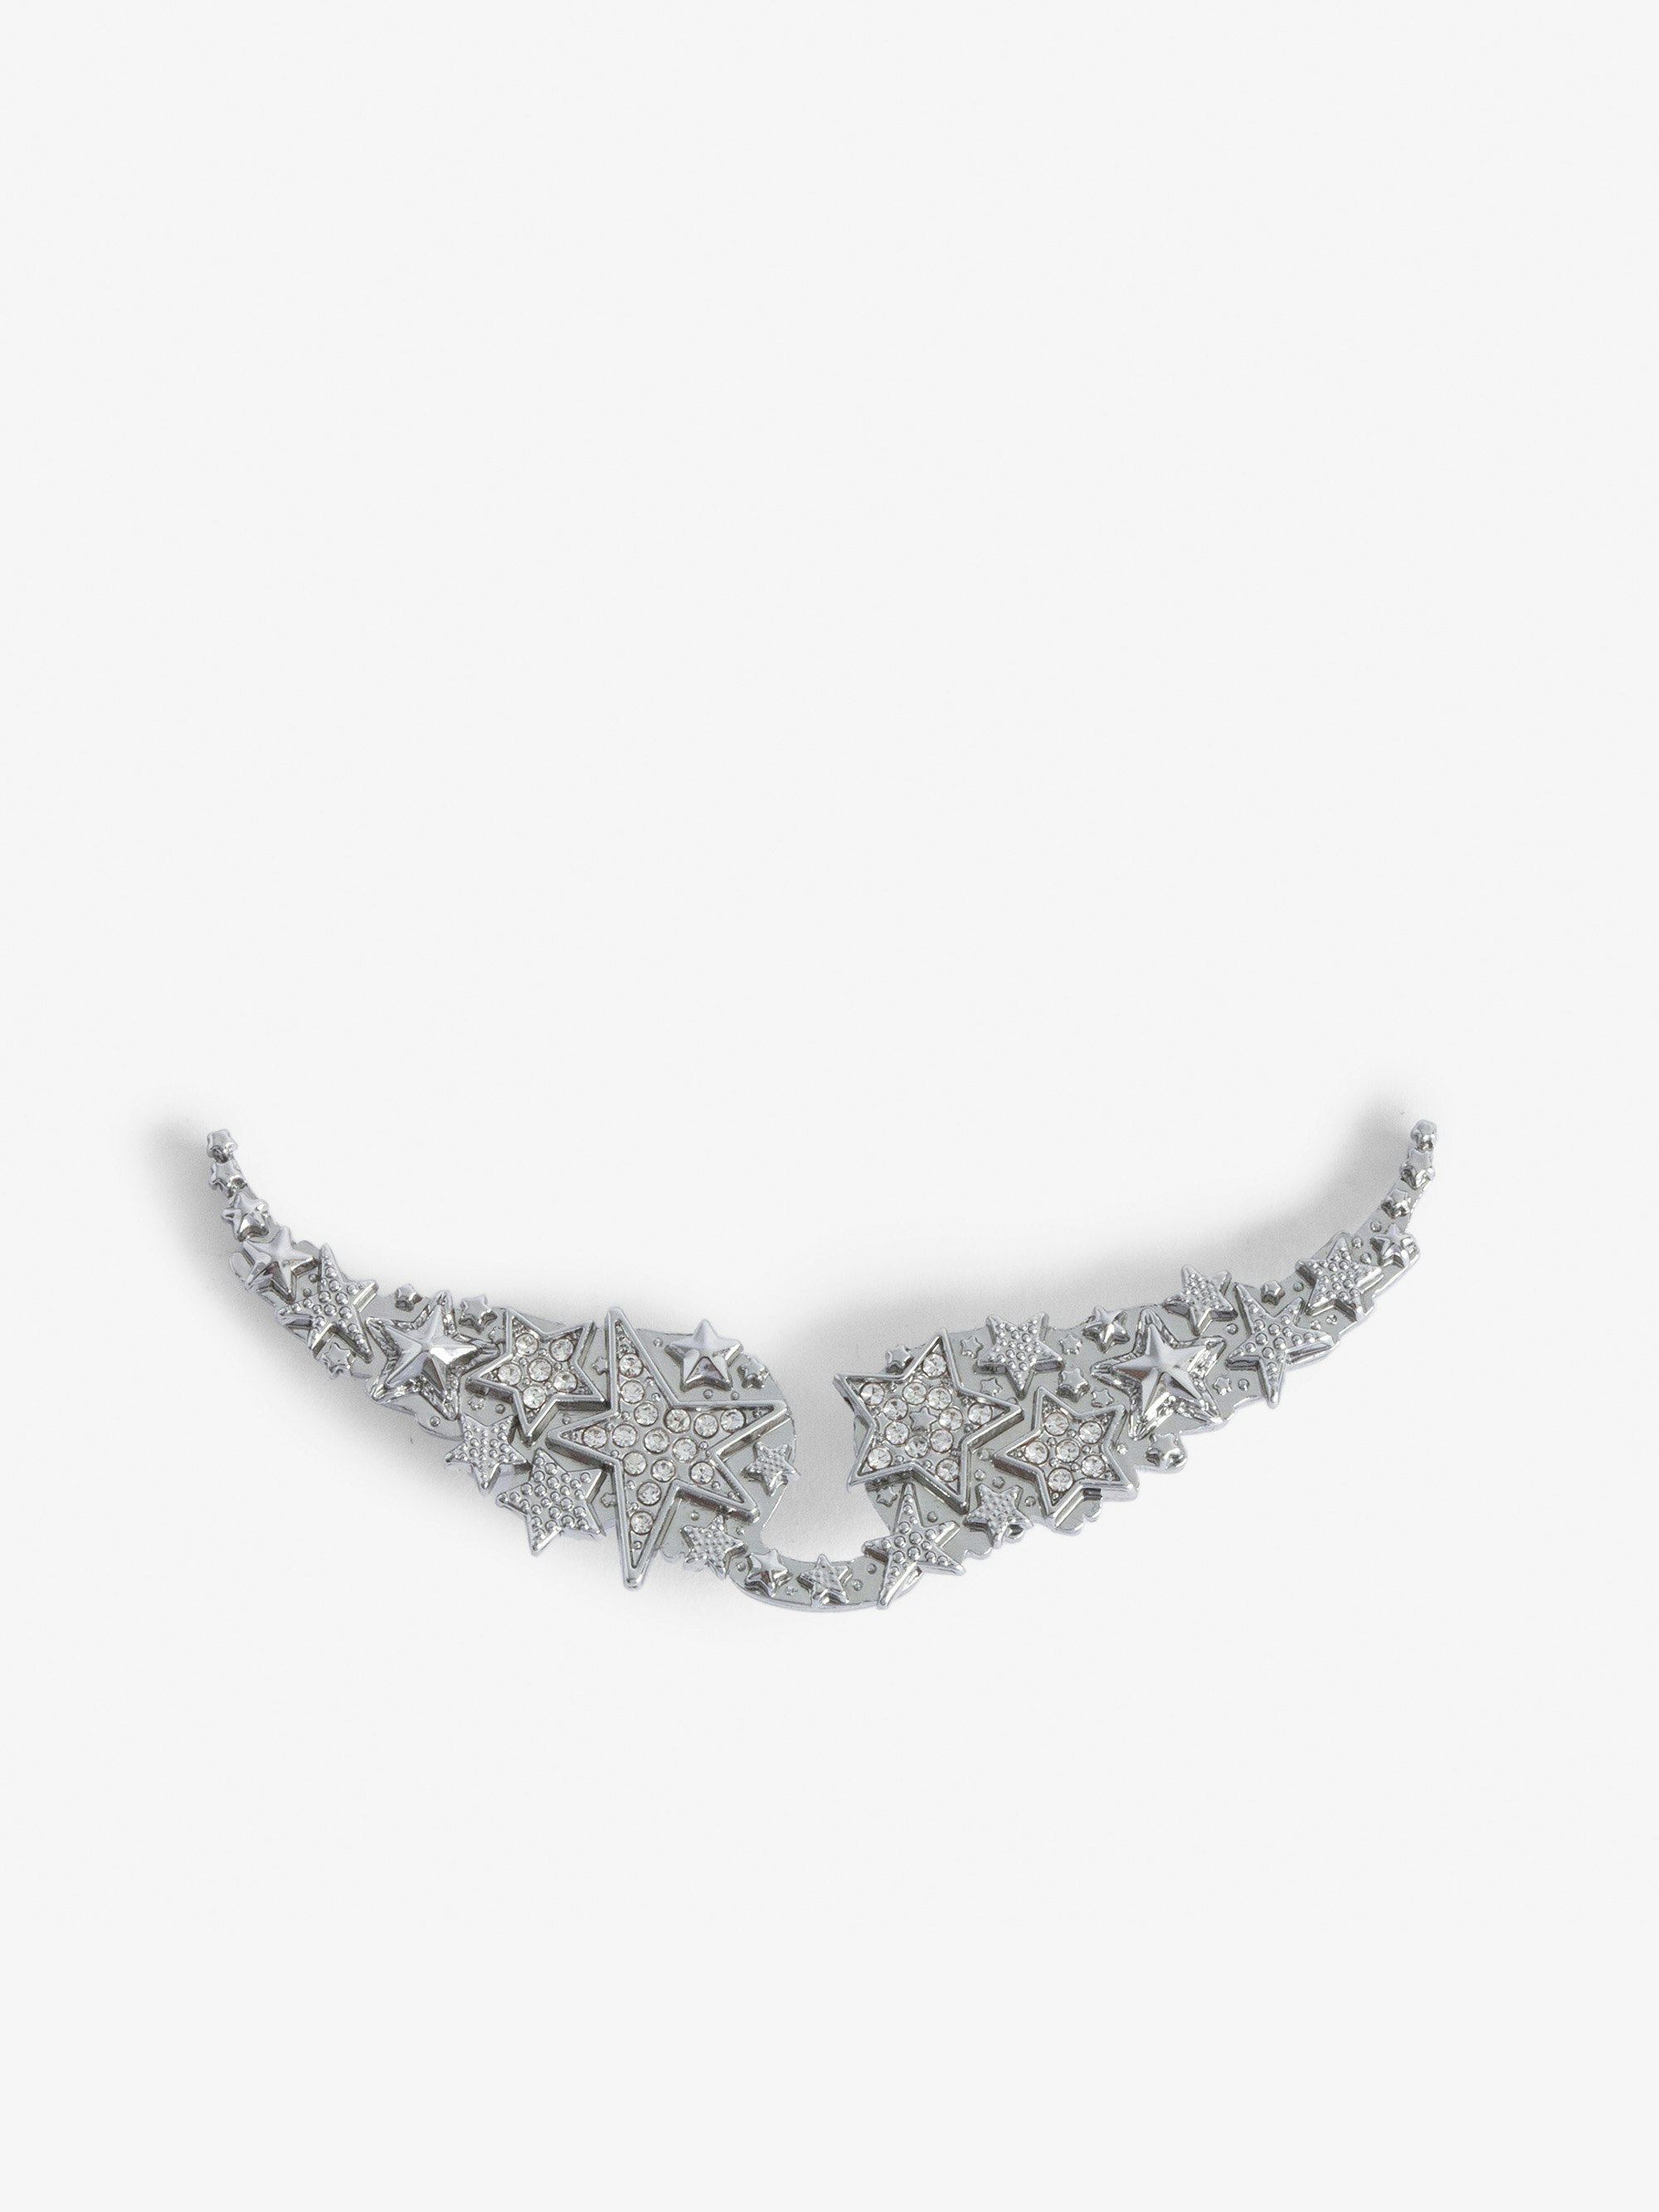 Charm Swing Your Wings Stelle Strass - Charm ali argentate con stelle e strass.